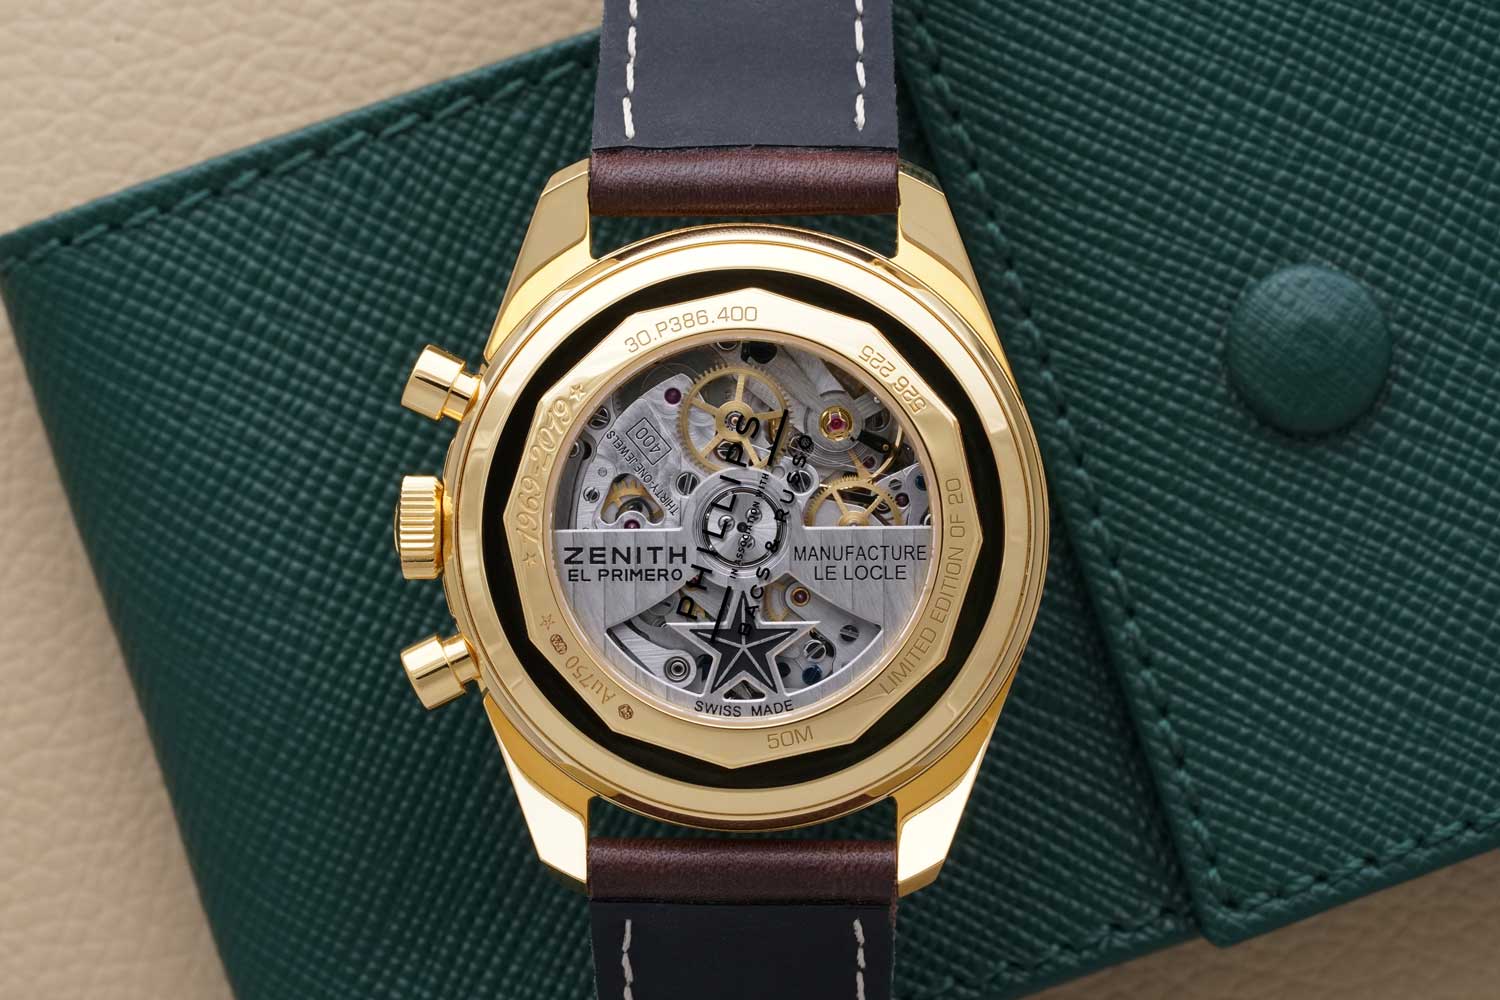 El Primero A386 Revival – Yellow Gold (Image: Phillips Watches)